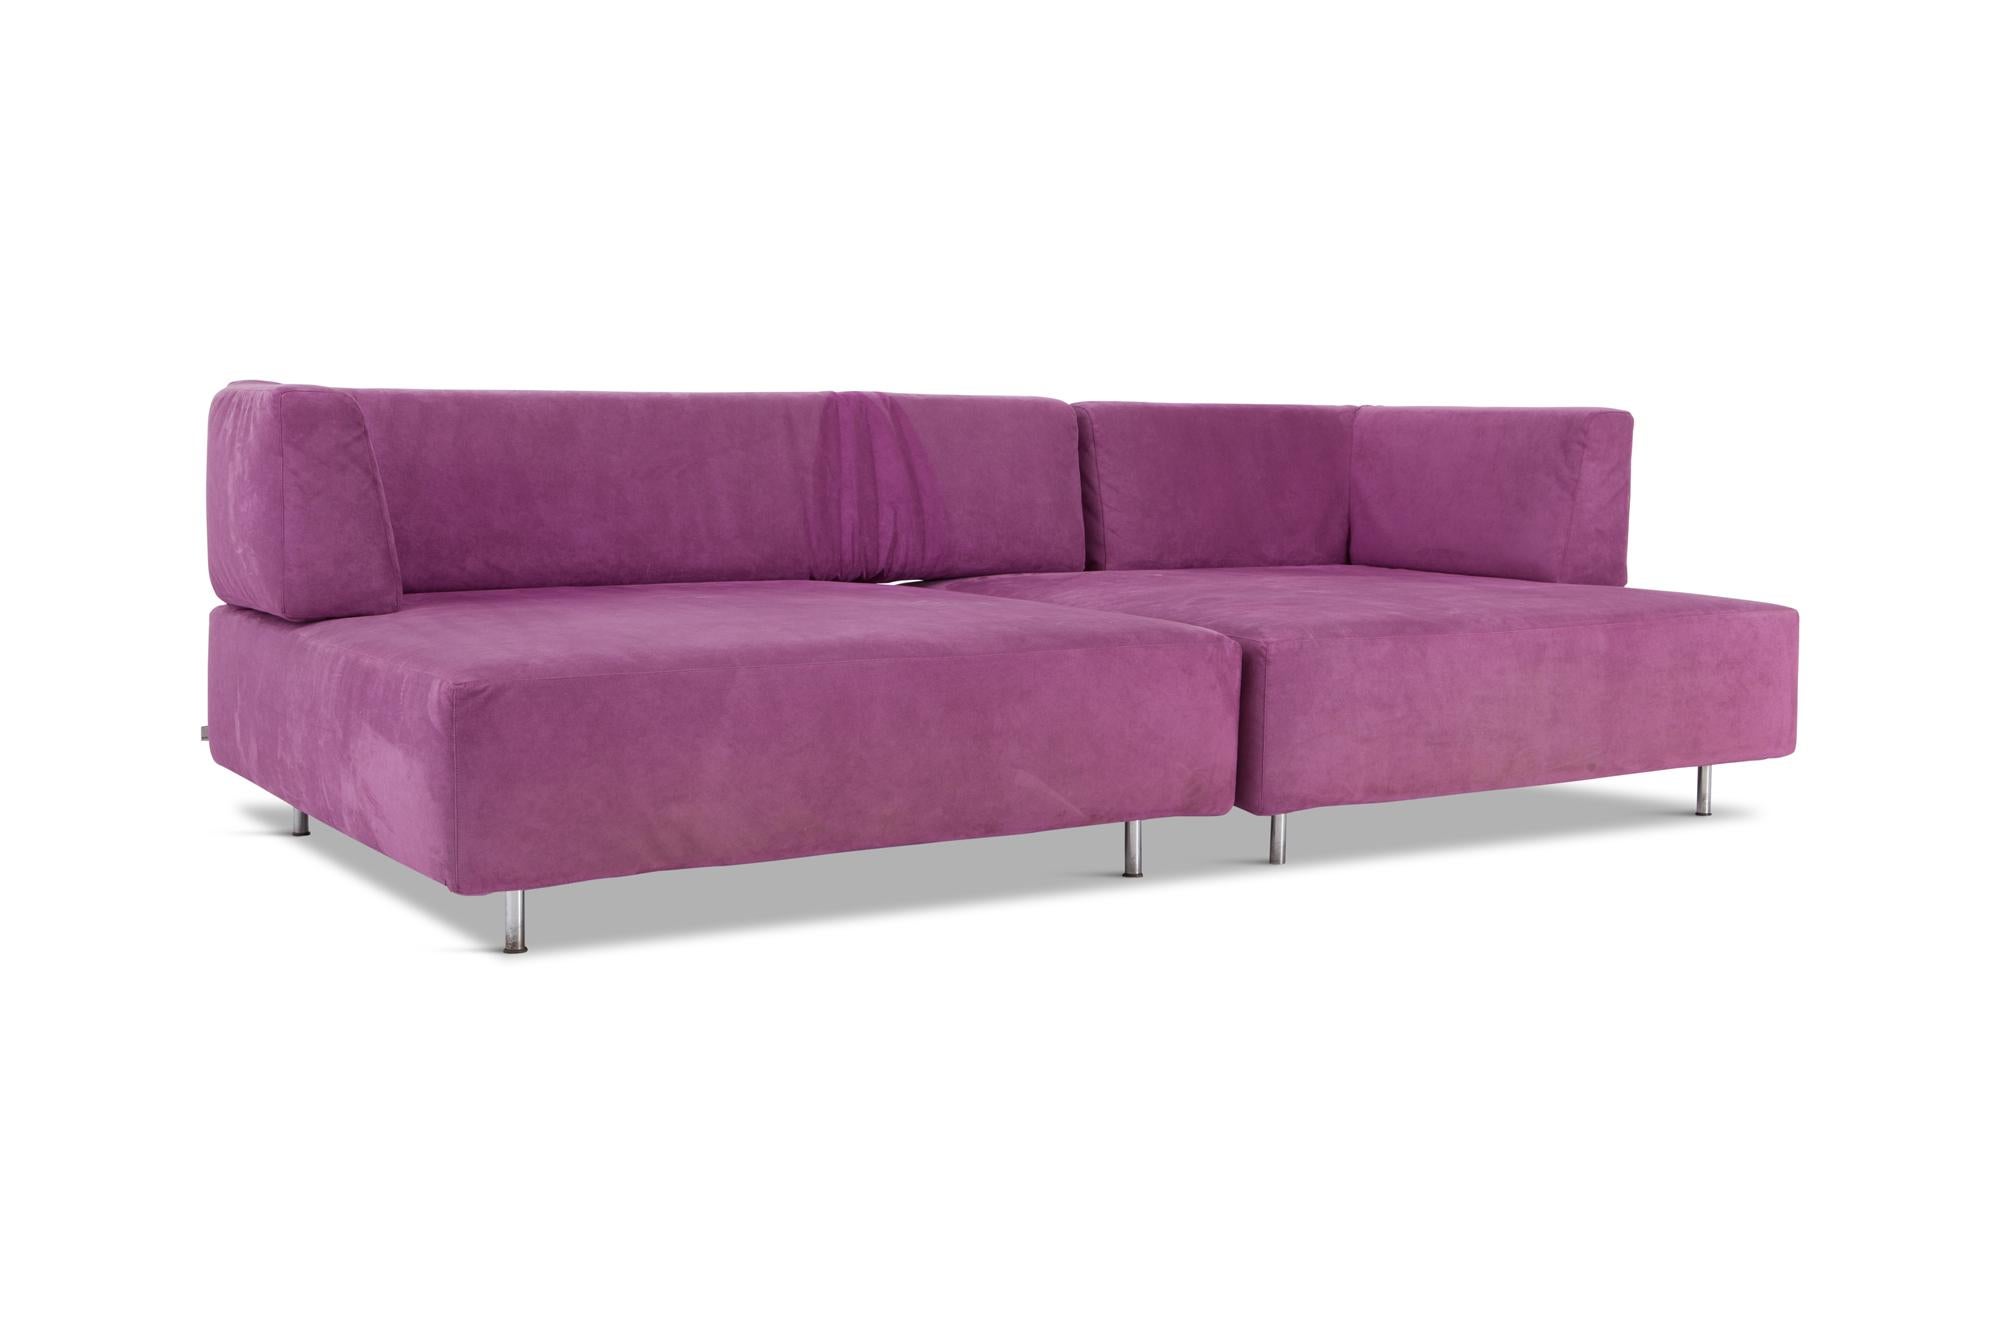 Modular sofa elements in original purple fabric, designed by Francesco Binfaré for Edra, Italy, 1993. The two elements can be placed in a variety of positions in playful manner due the adjustable backrest. The sofa is made with high quality